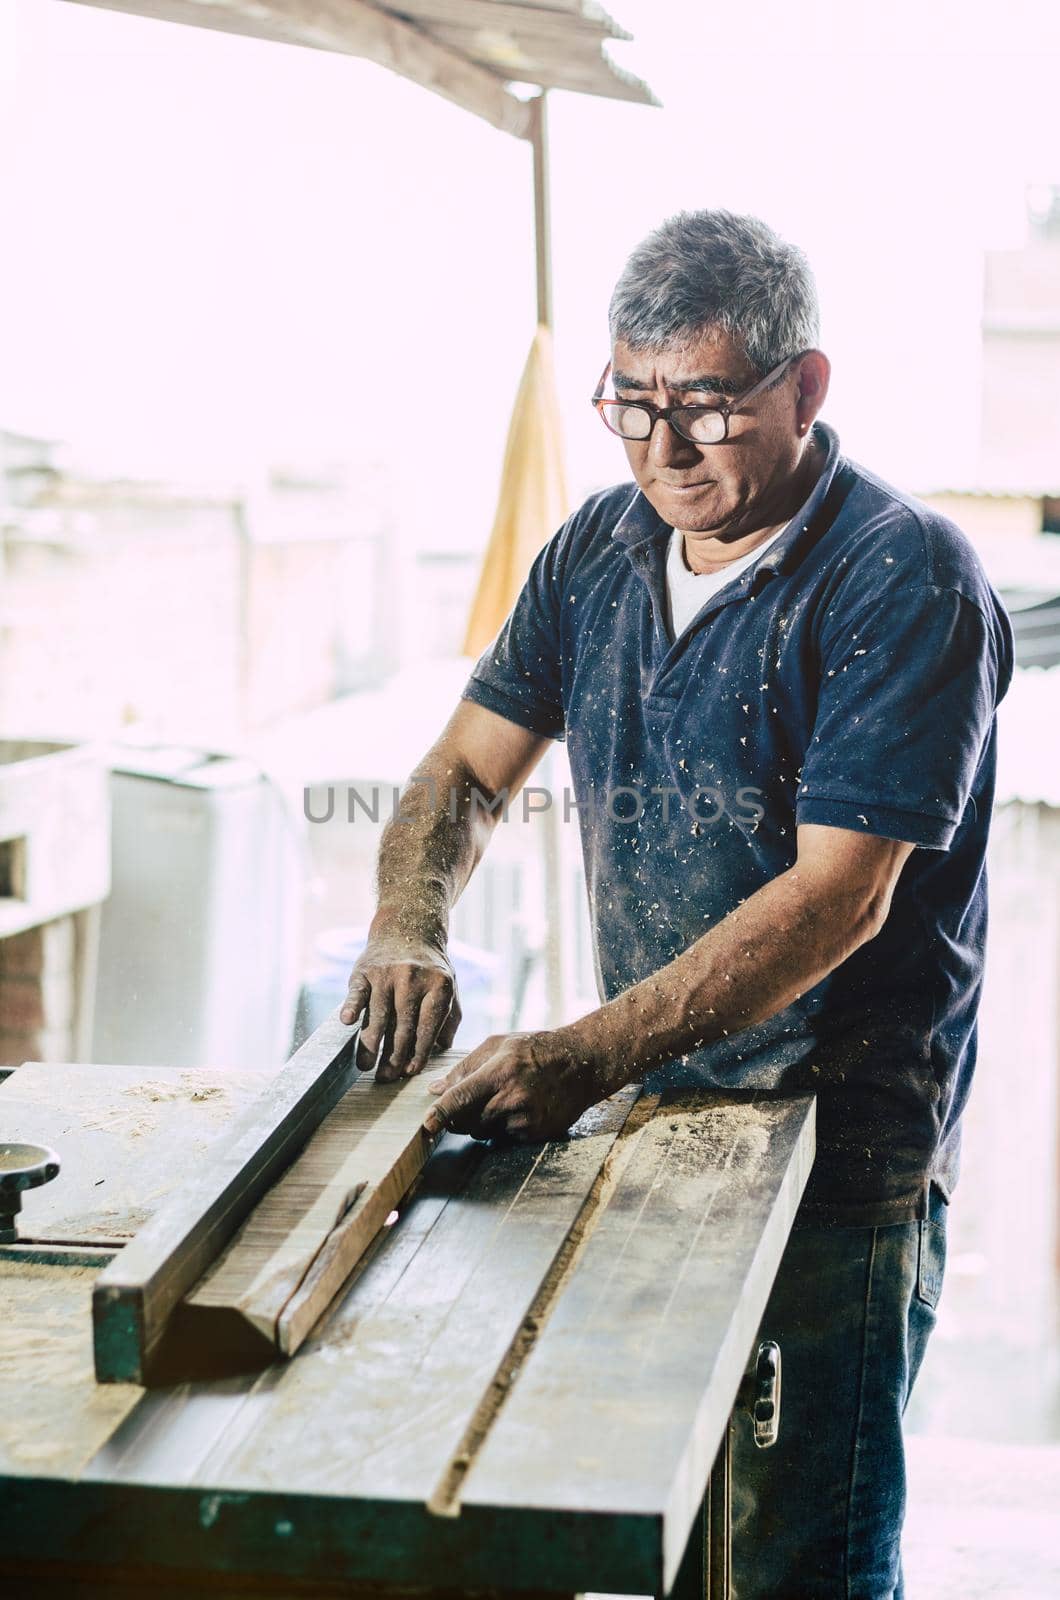 Carpenter cutting wooden board at his workshop by Peruphotoart